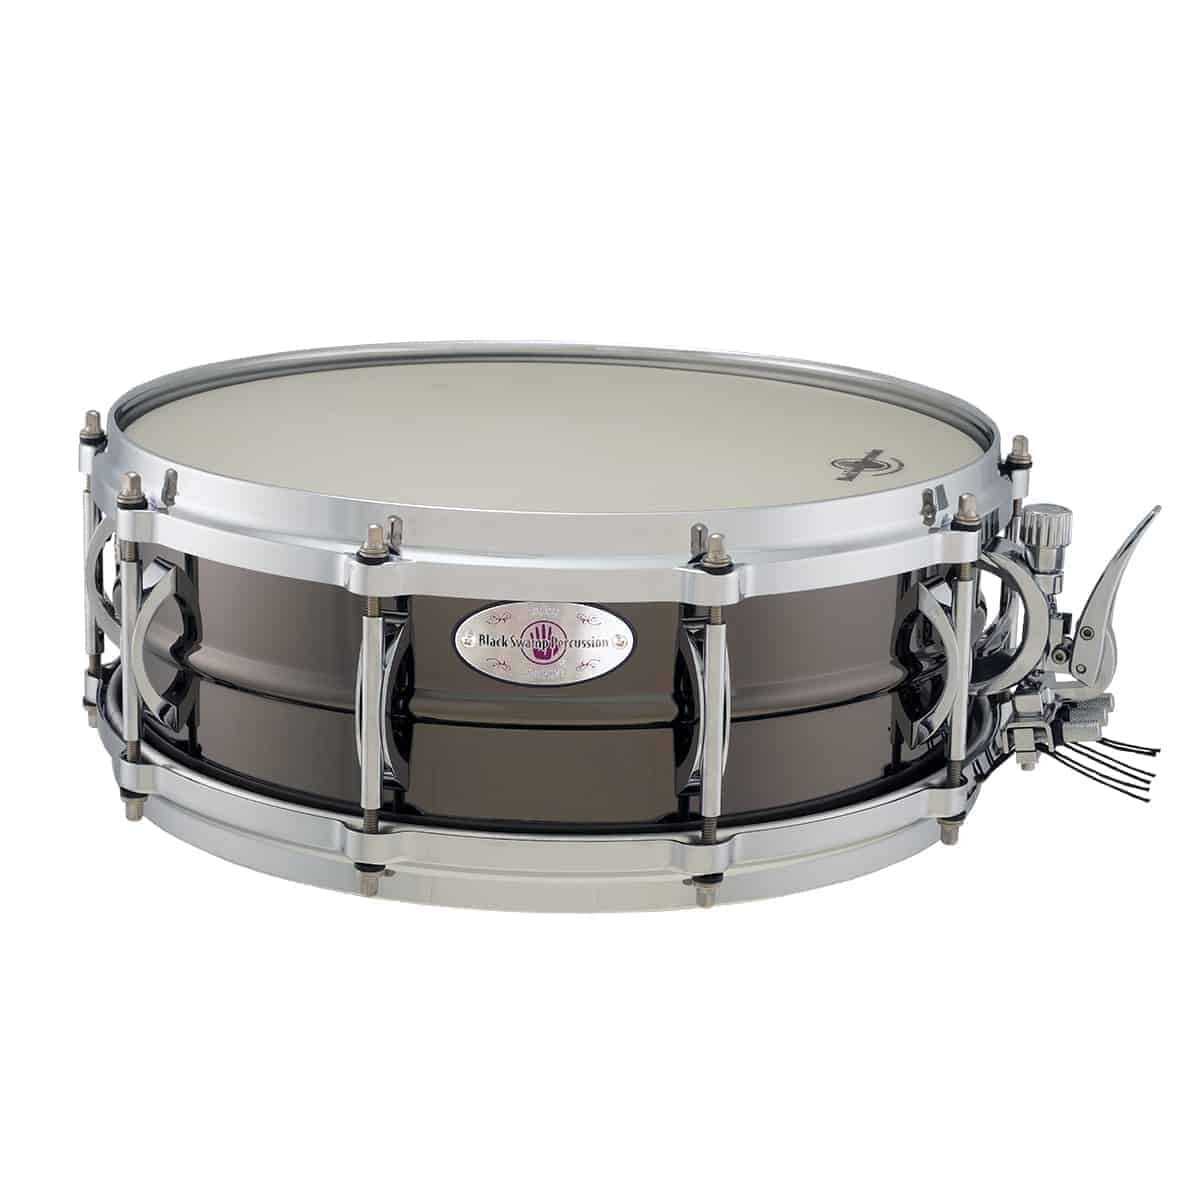 Pearl Philharmonic Brass Snare Drum - 14-inch x 4-inch, Black